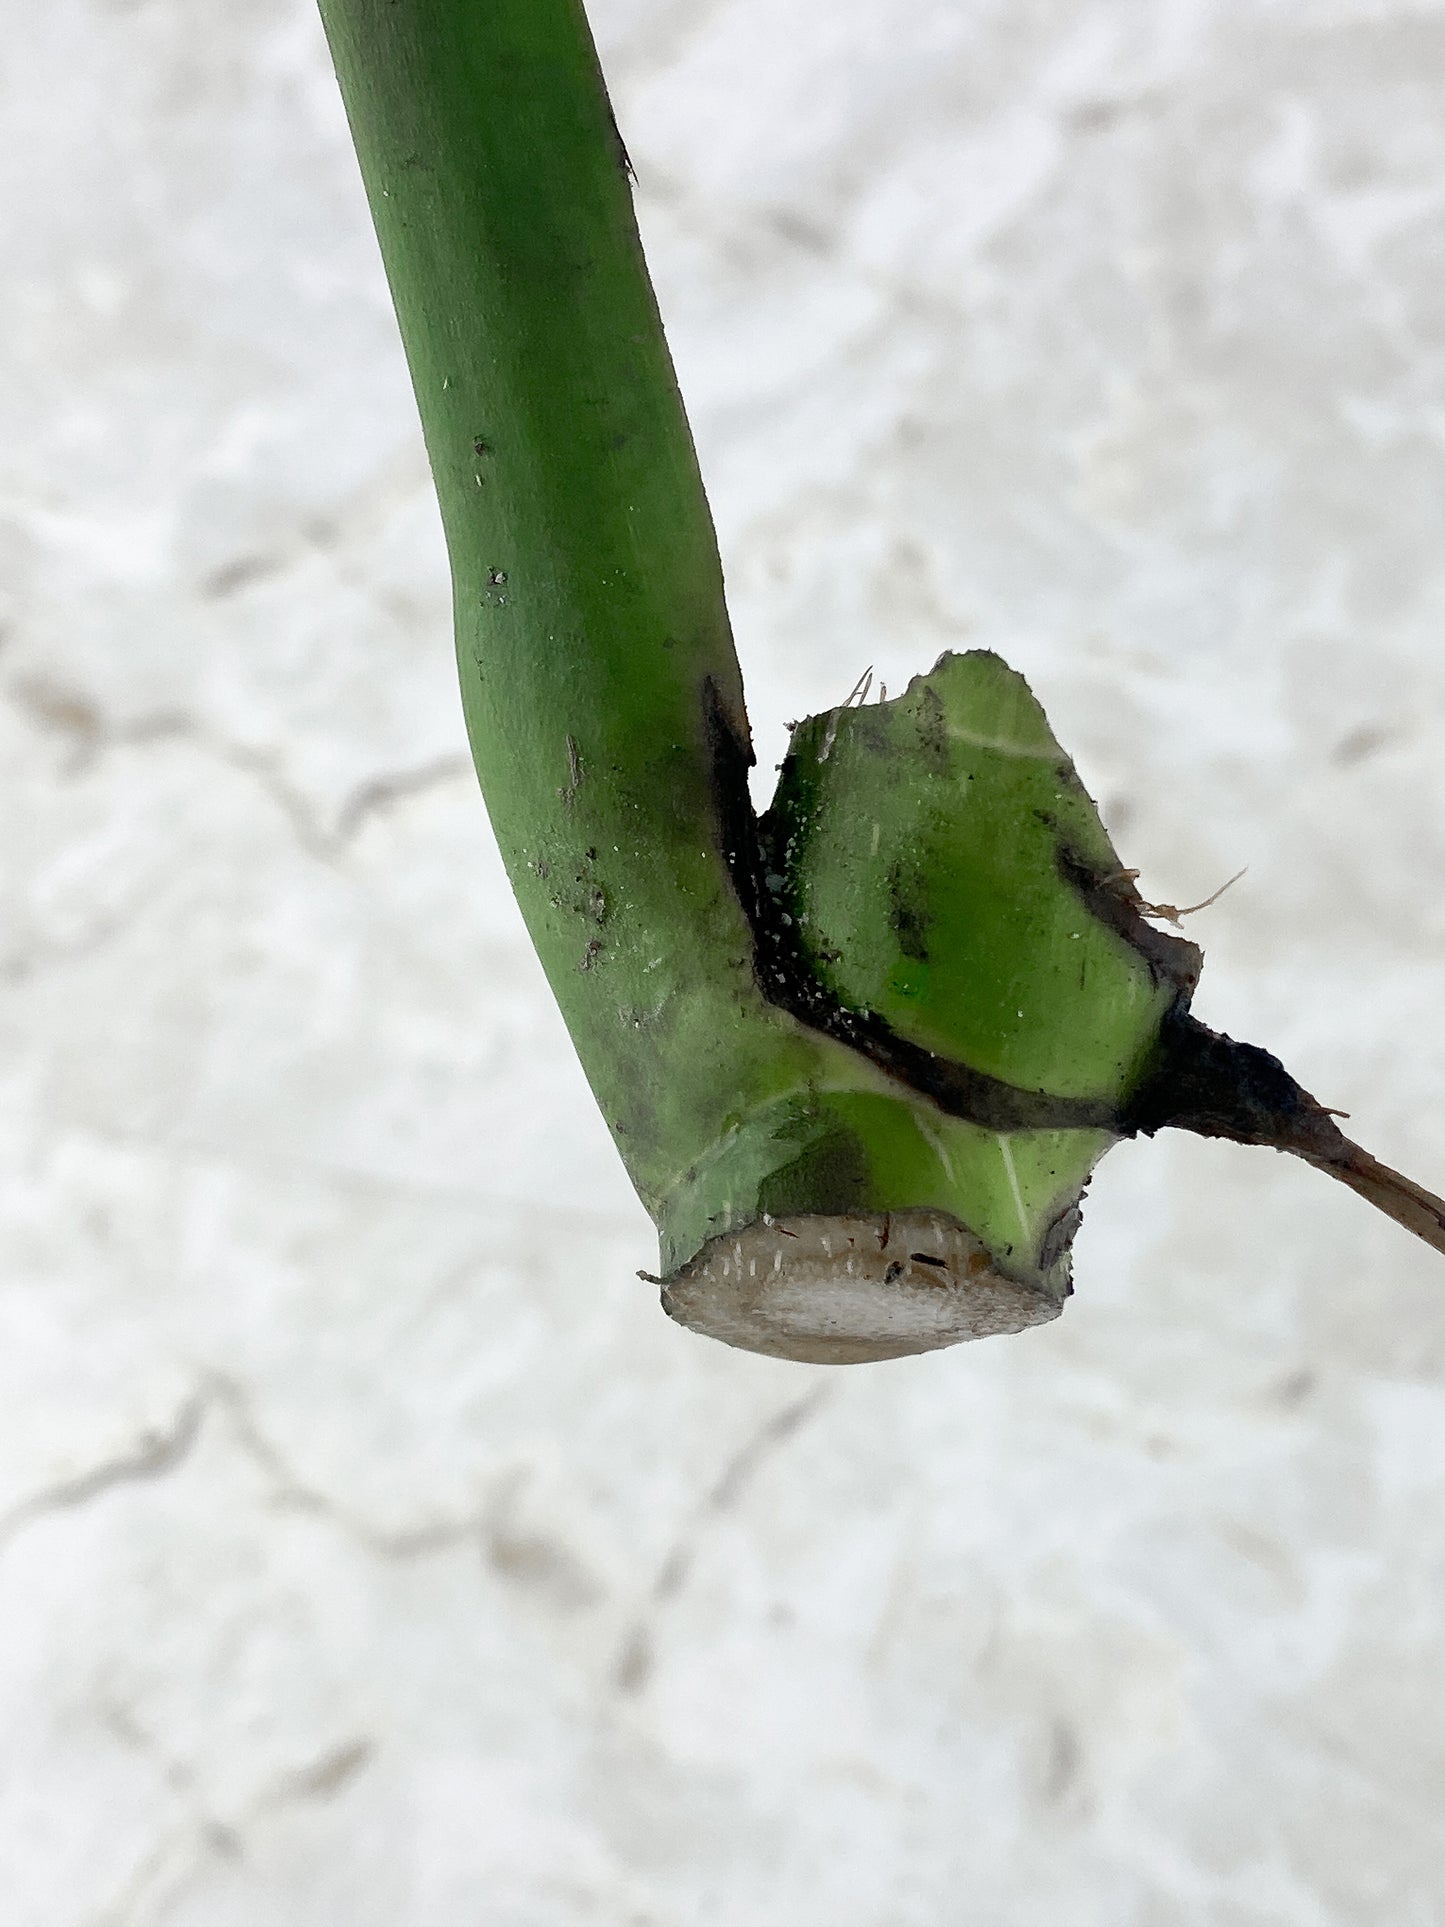 Monstera Thai Constellation Unrooted Cutting